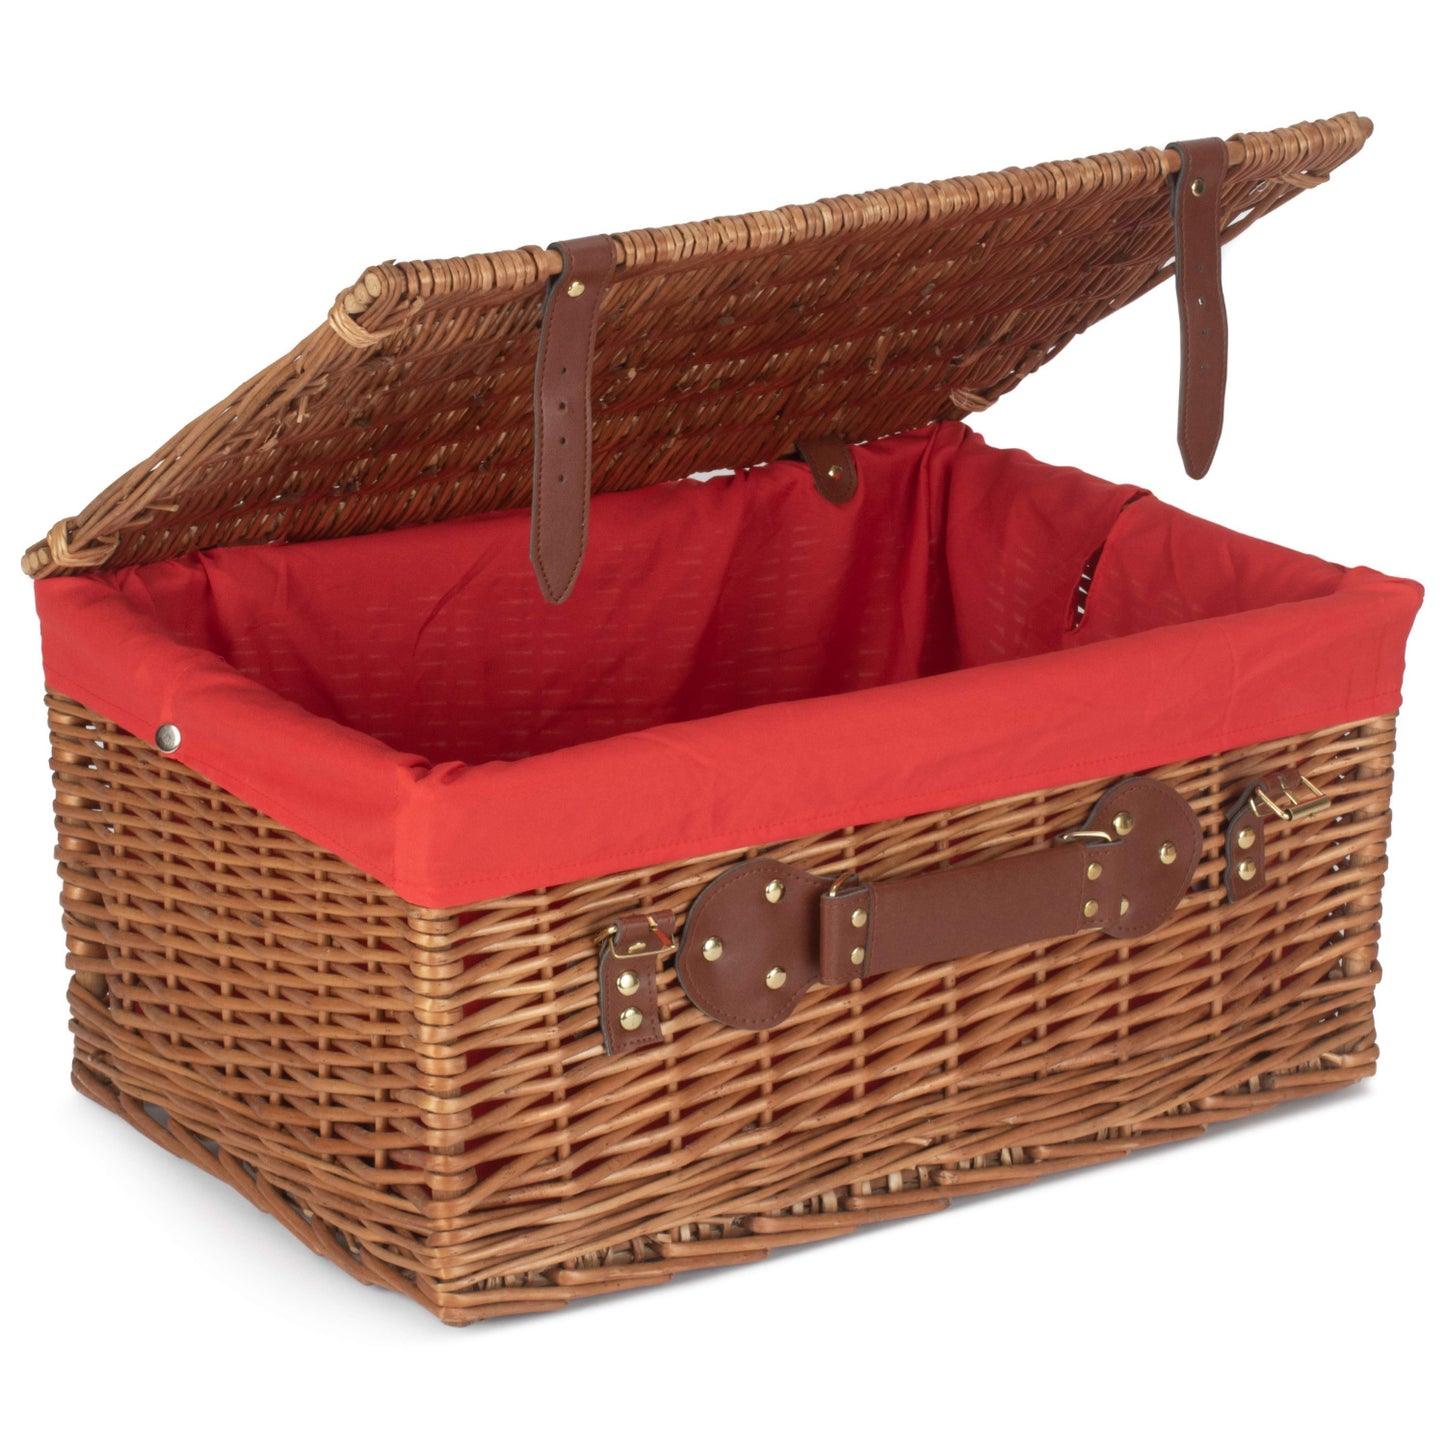 20 Inch Light Steamed Hamper With Red Lining